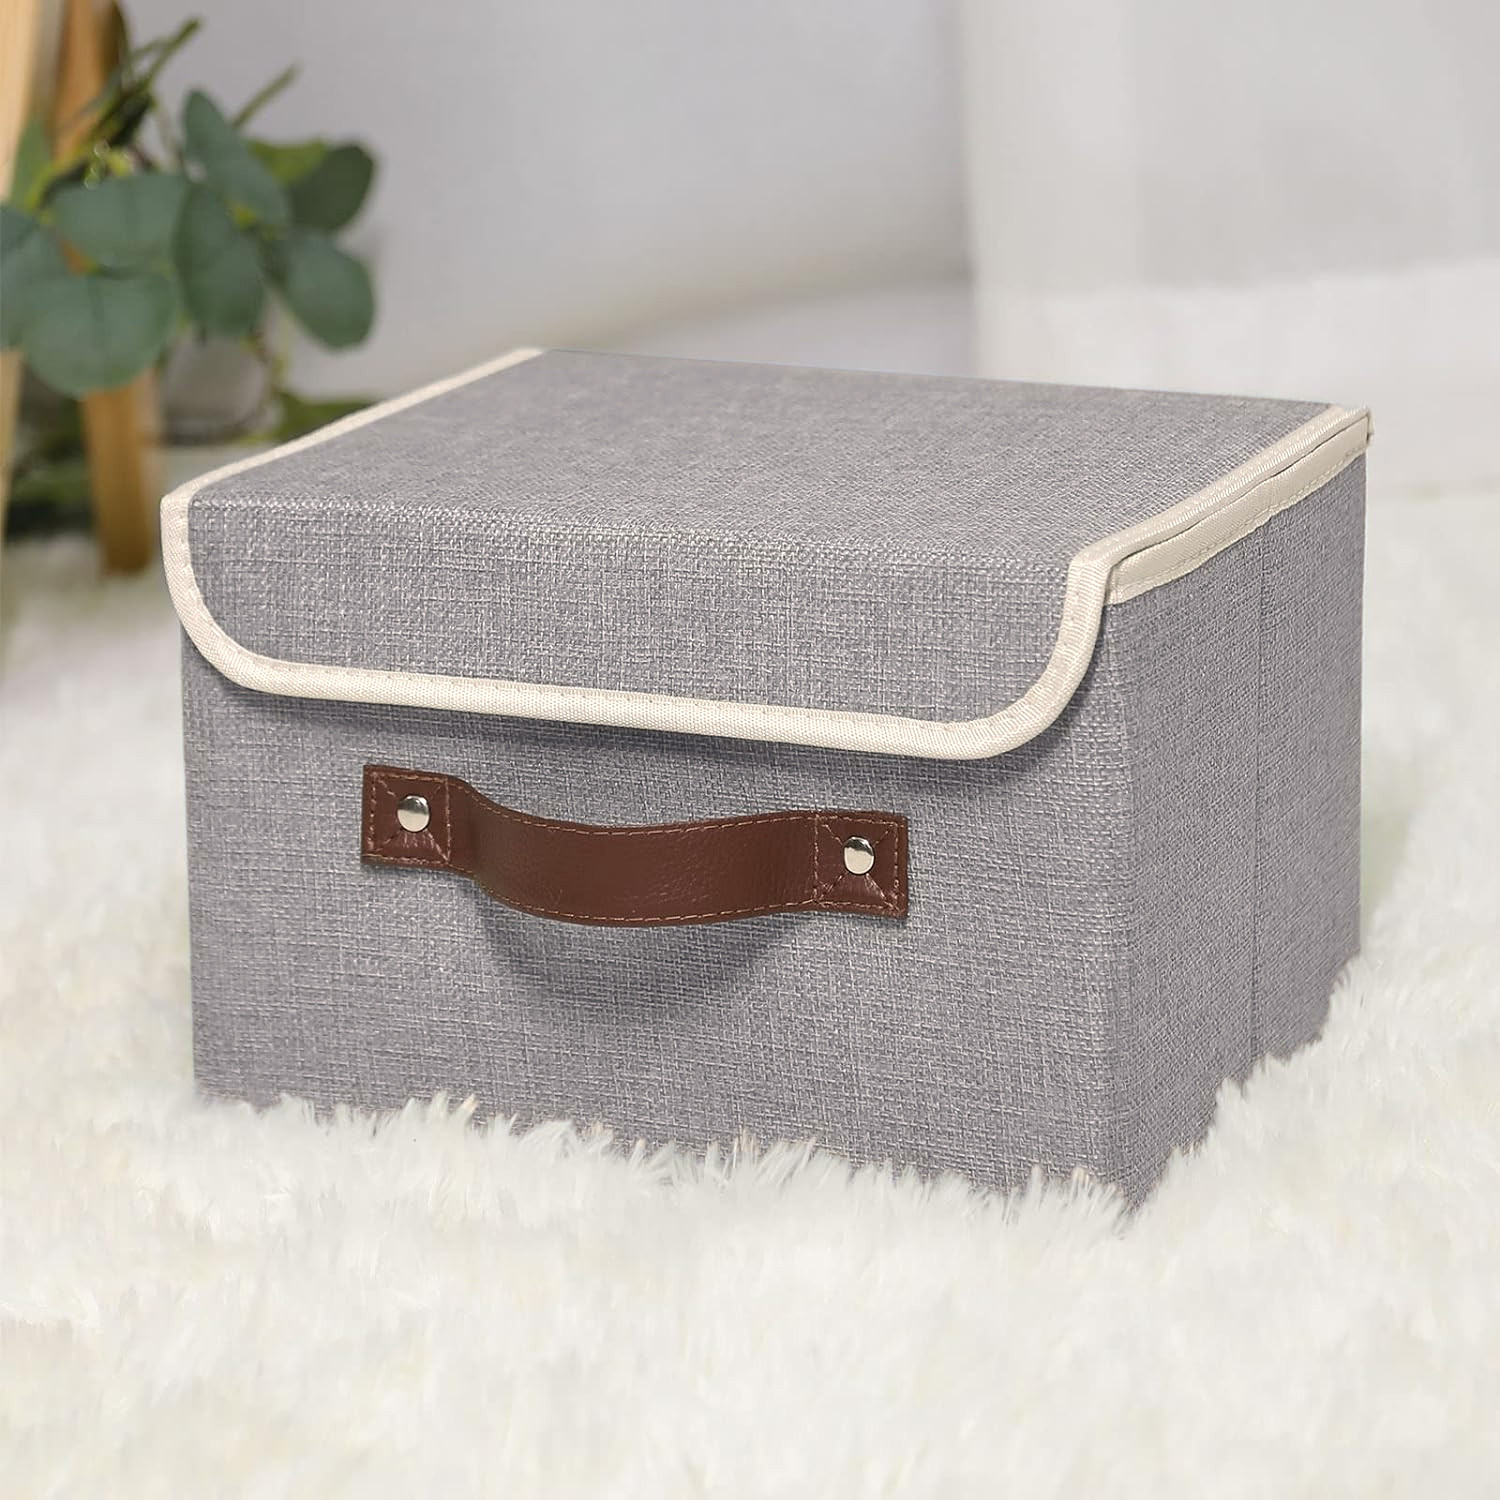 Kuber Industries Small Storage Box With Lid|Foldable Toys Storage Bin|Wardrobe Organizer For clothes|Front Handle & Sturdy (Grey)